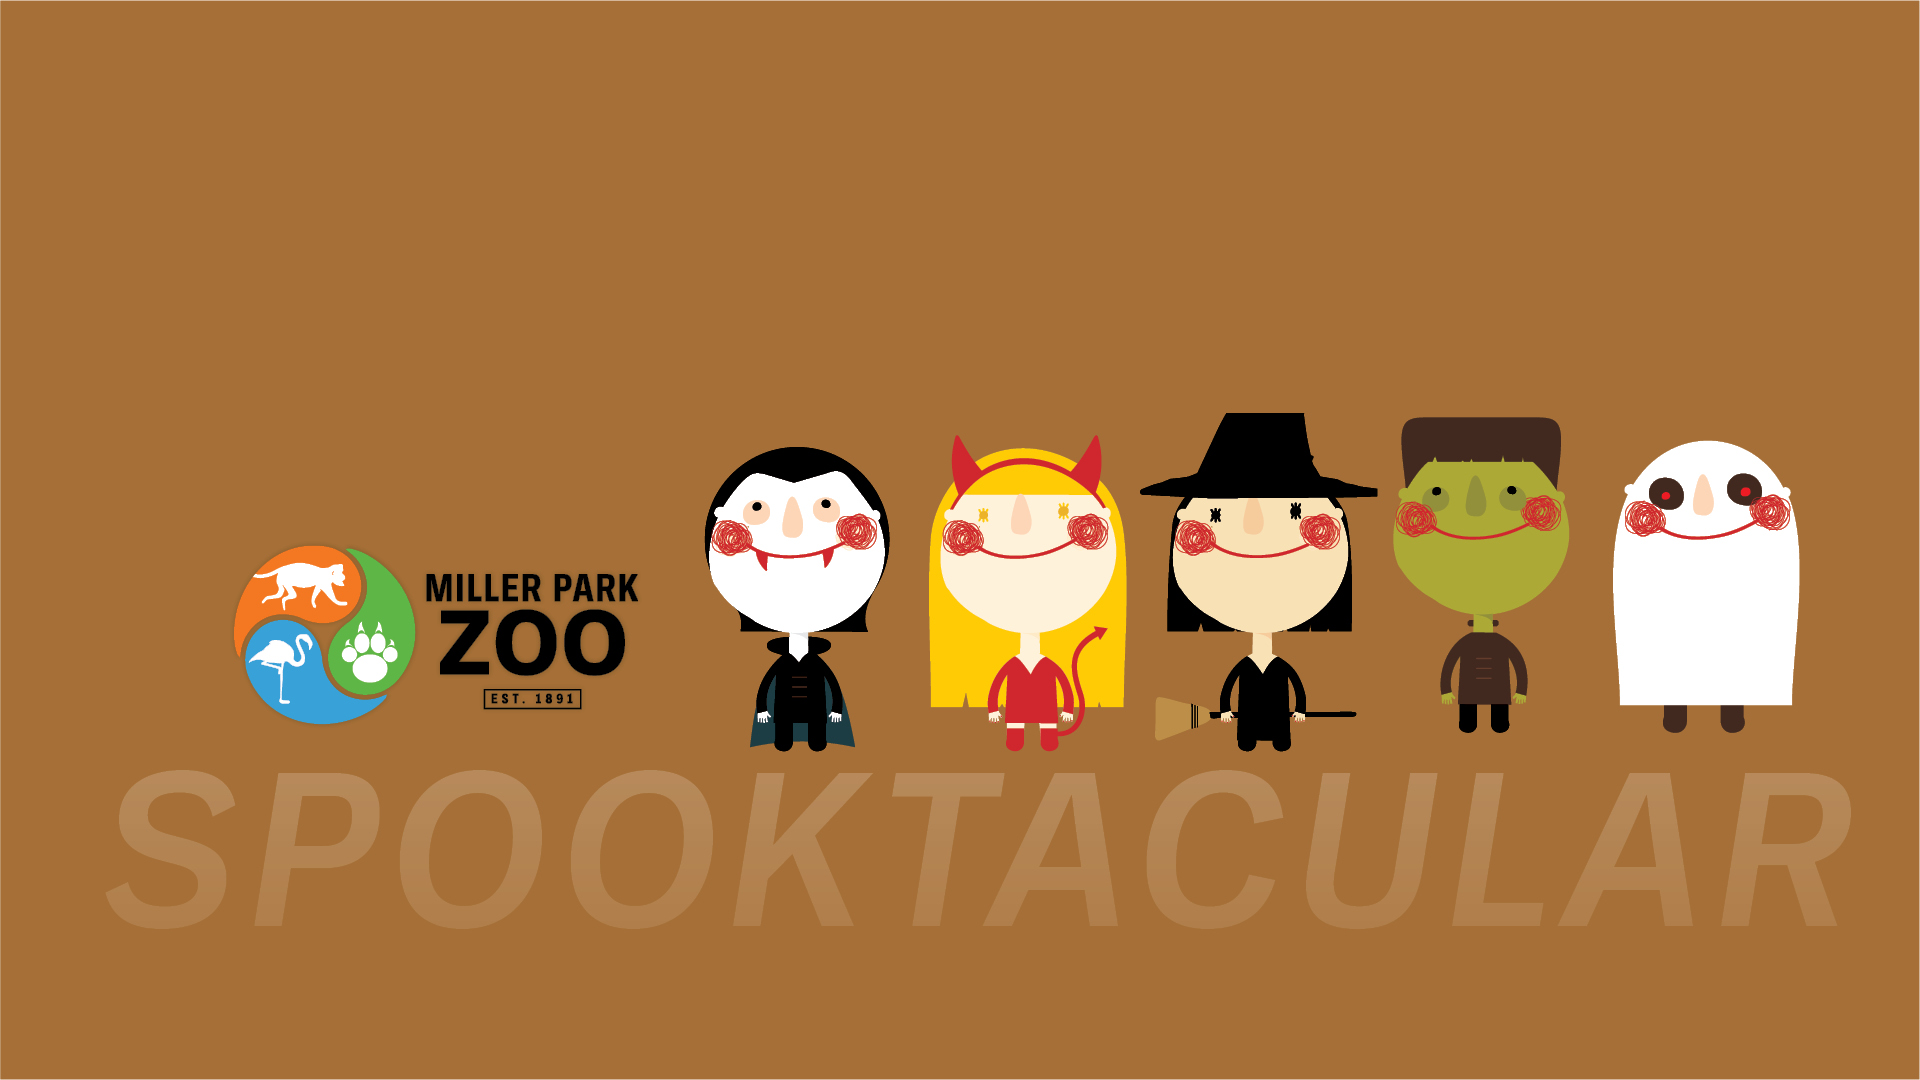 Spooktacular at the Zoo!